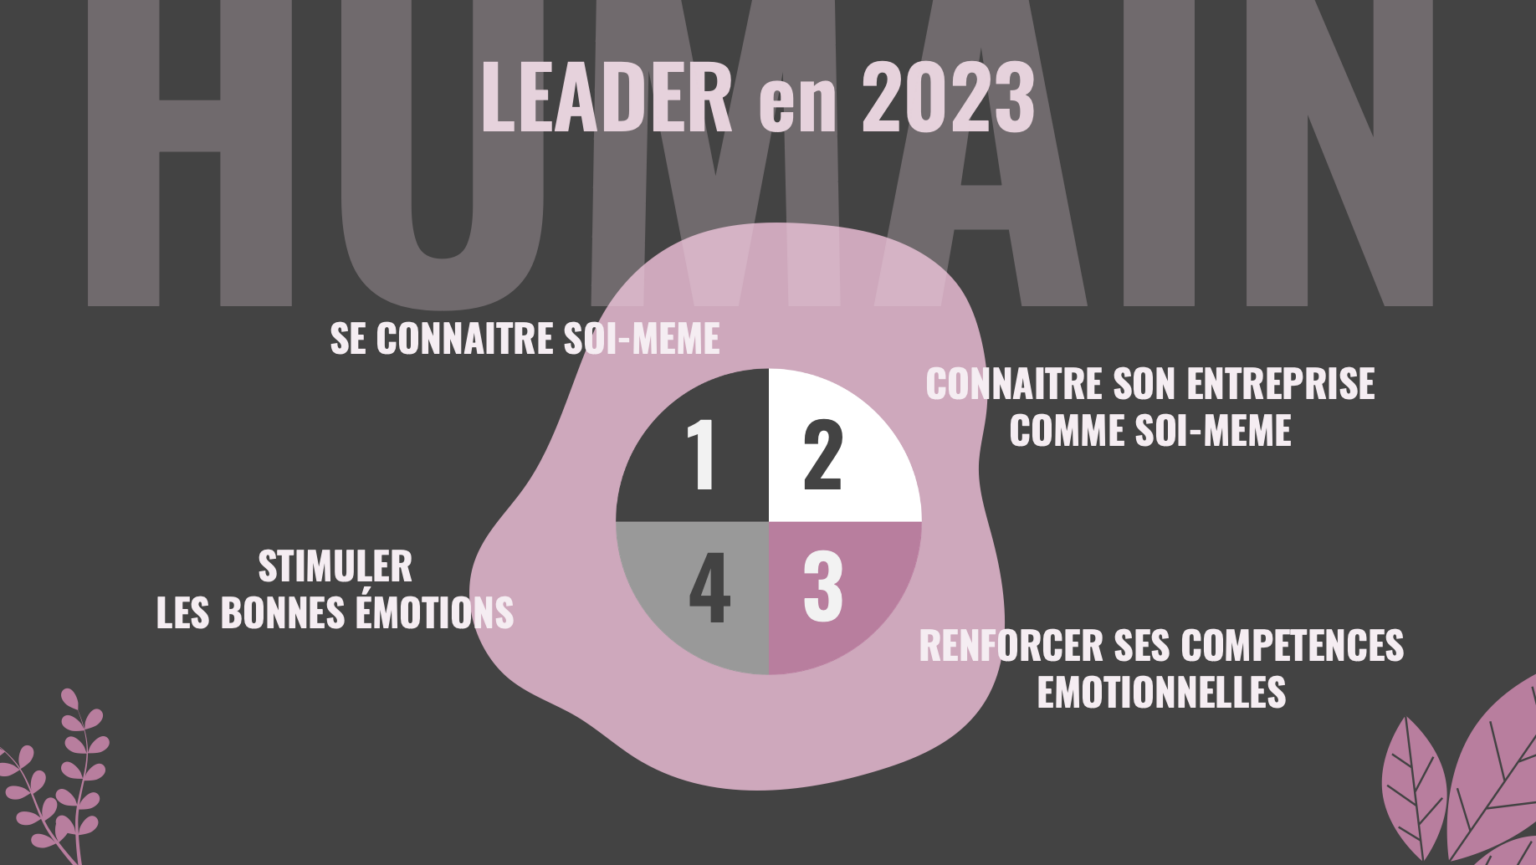 Adapter efficacement son leadership